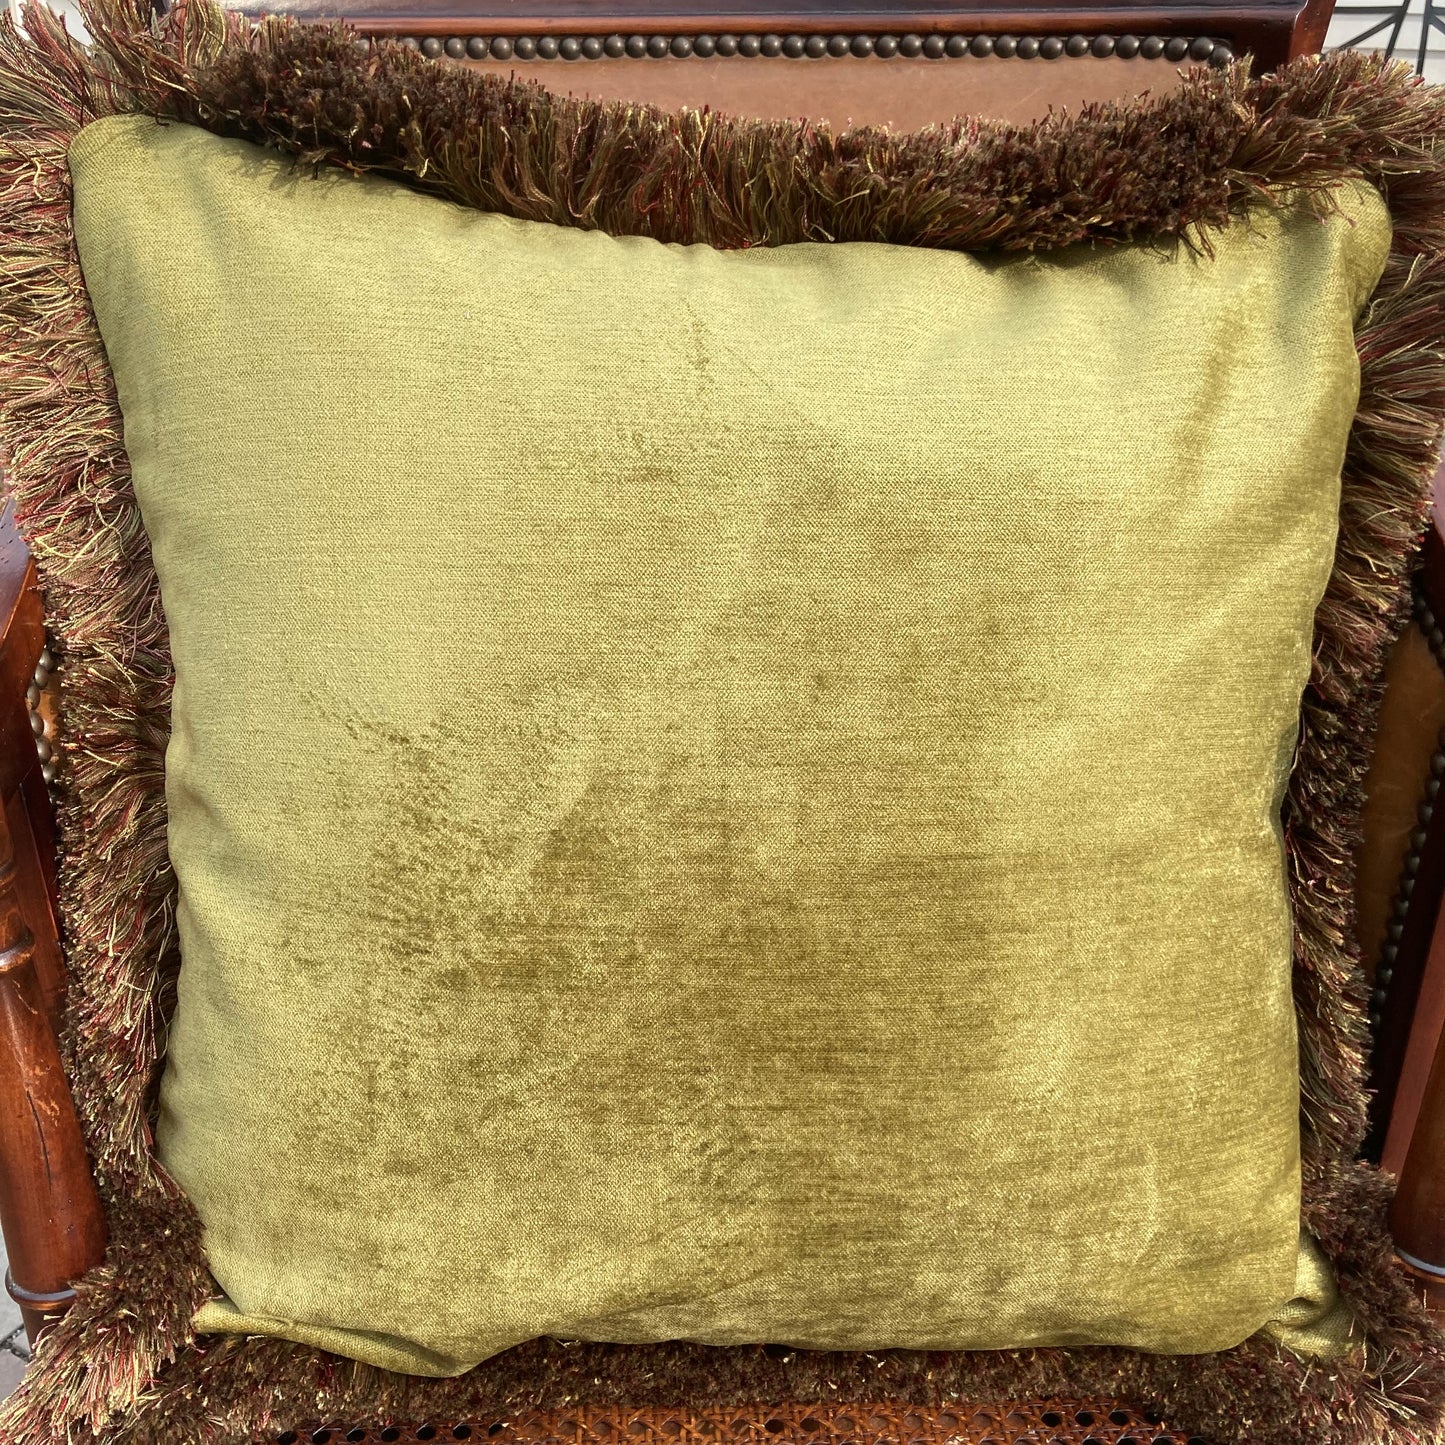 Moss Green Paisley Chenille 21 x 21 Square Decorative Pillow Back with Down Feather Insert